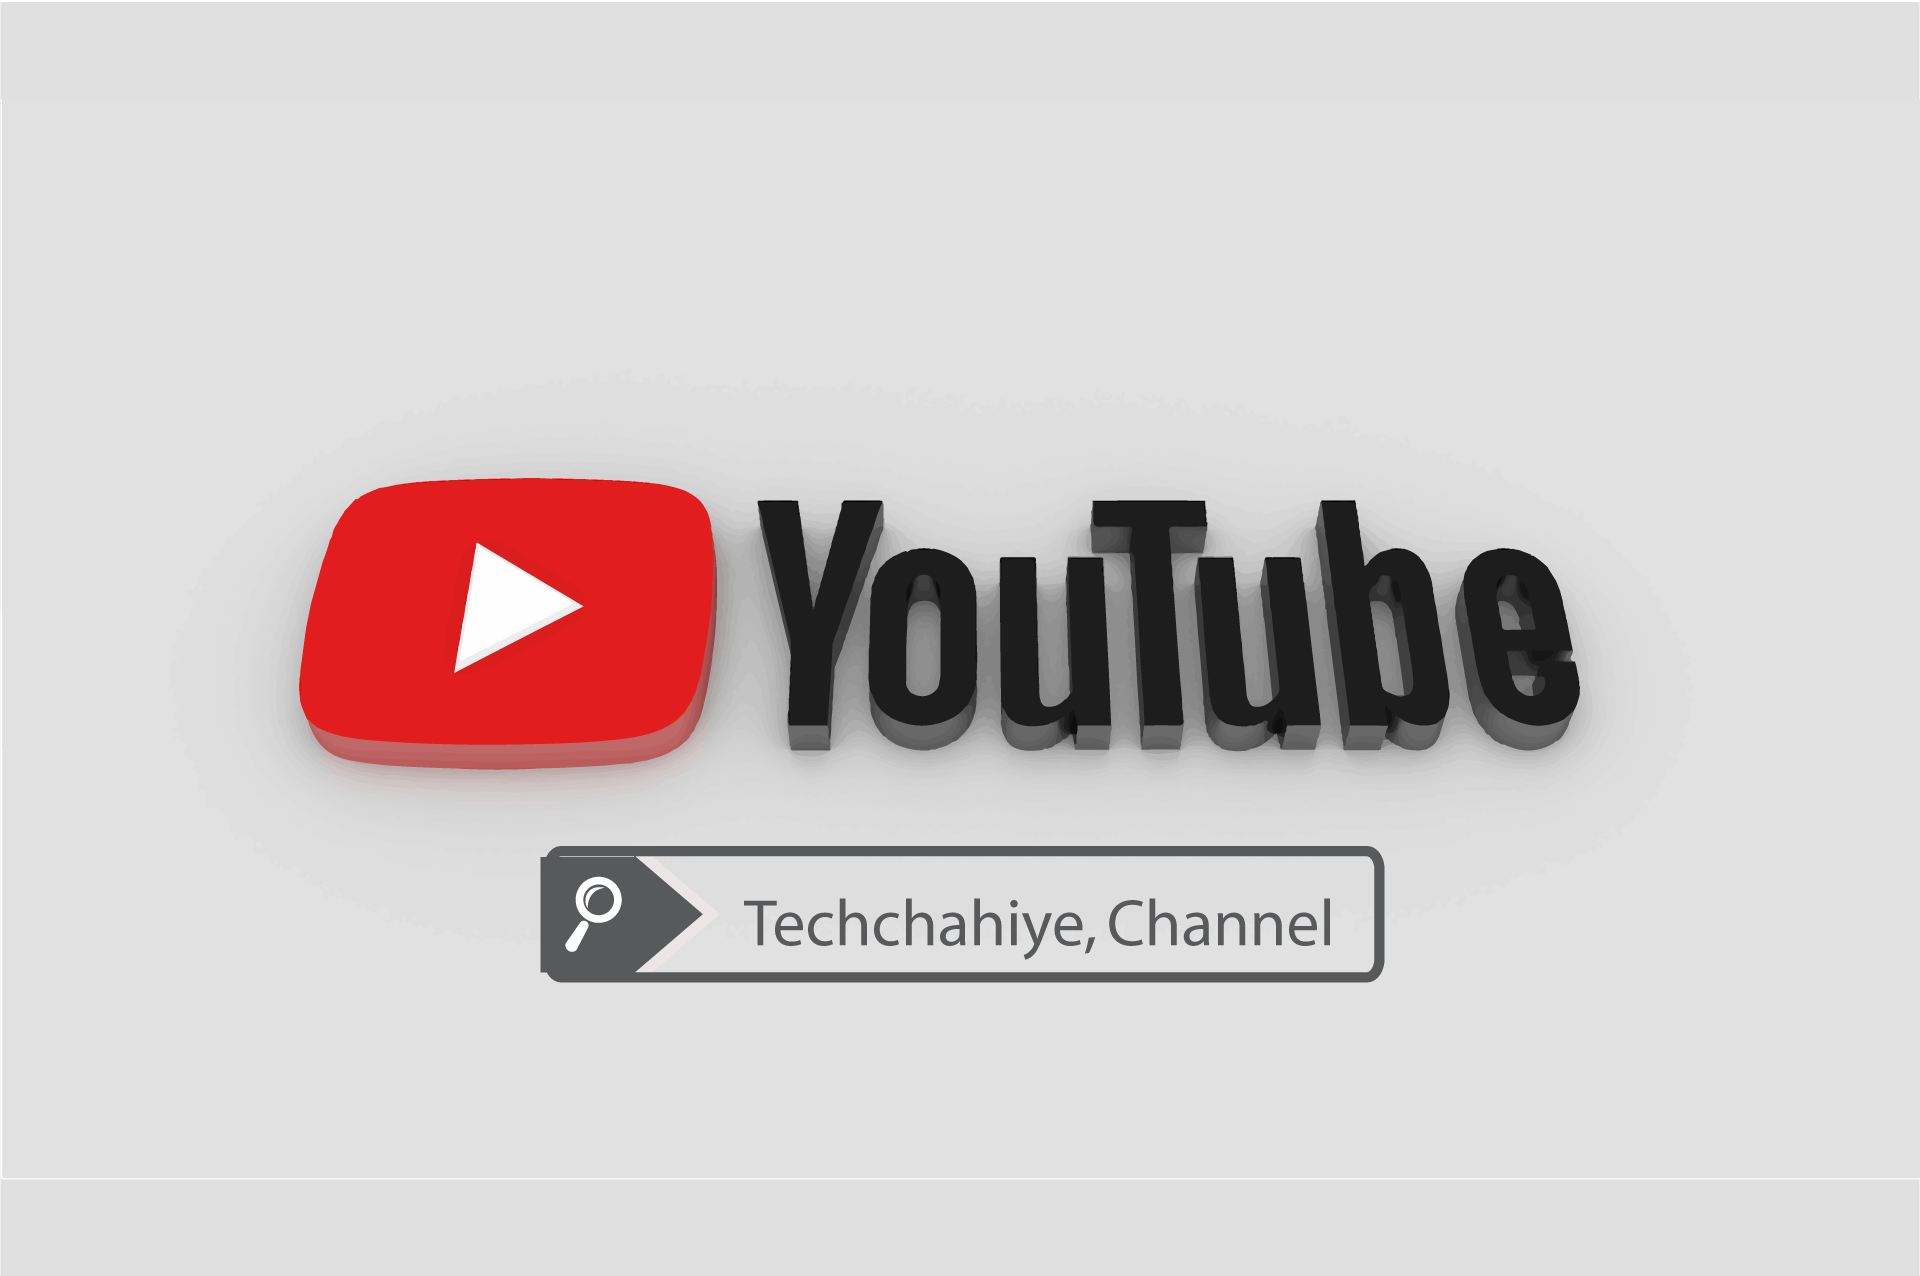 How to Search YouTube Videos like a Pro using search queries?
